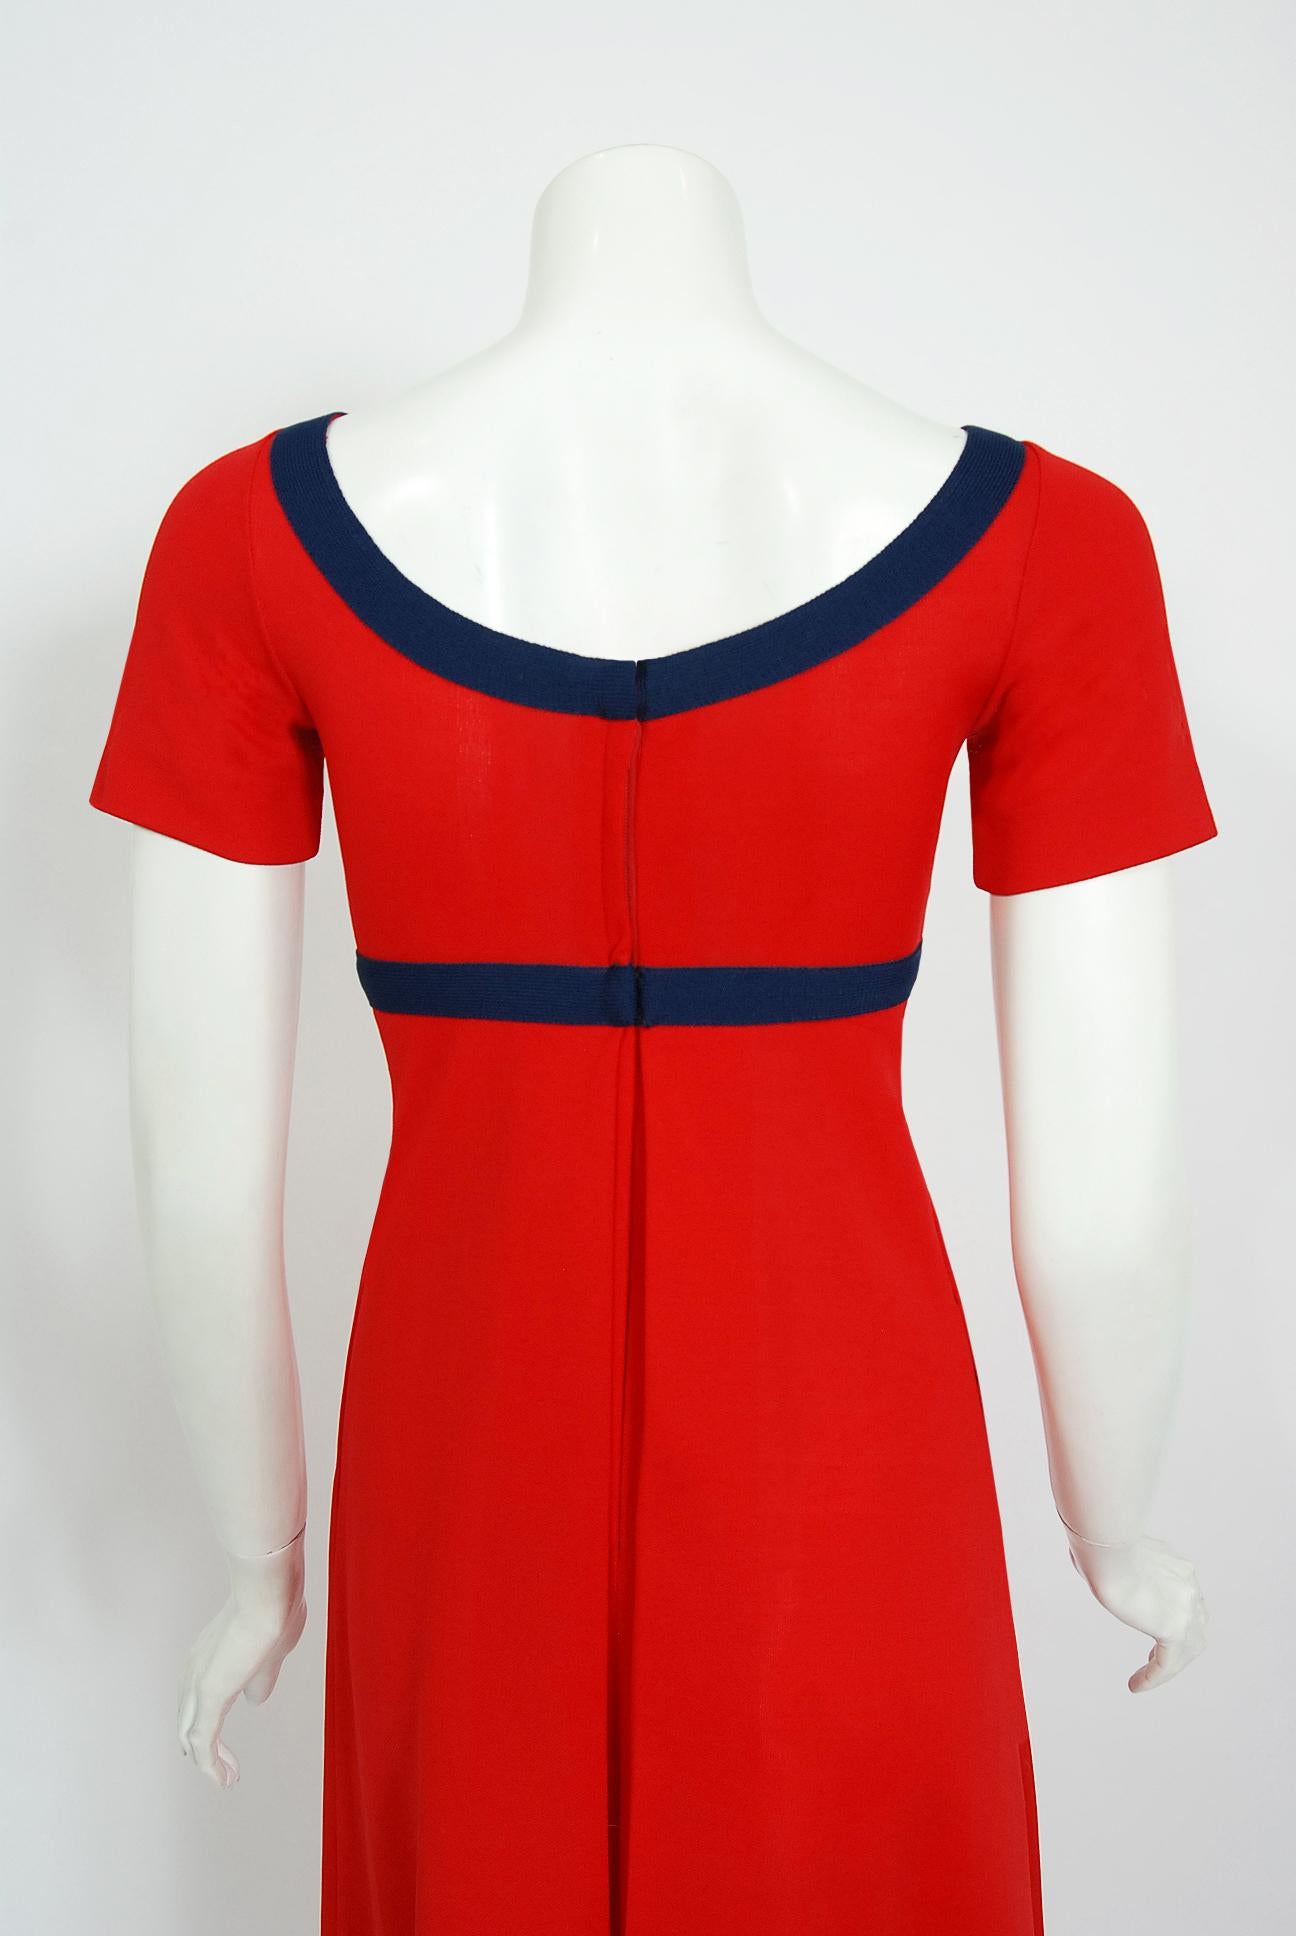 Vintage 1969 Rudi Gernreich Cross Your Heart Empire Red Navy Knit Mod Maxi Dress In Good Condition For Sale In Beverly Hills, CA